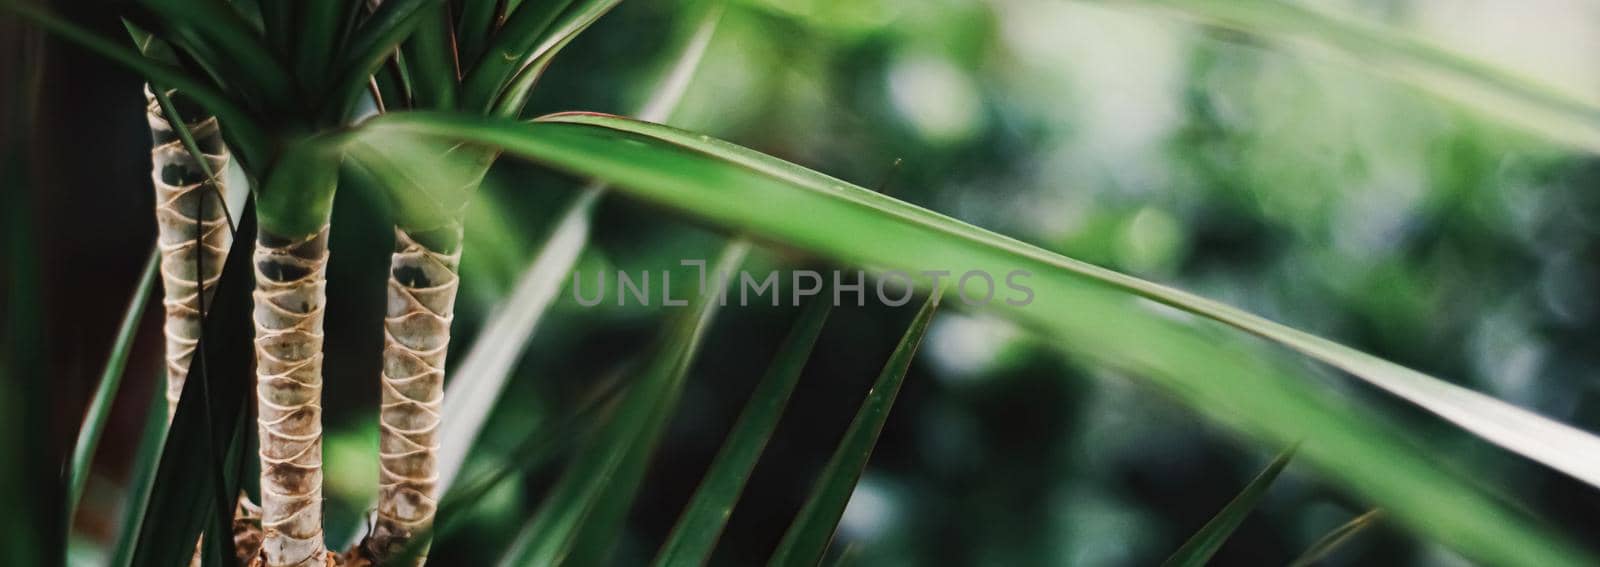 Exotic palm tree leaves, green nature and summer holiday closeup